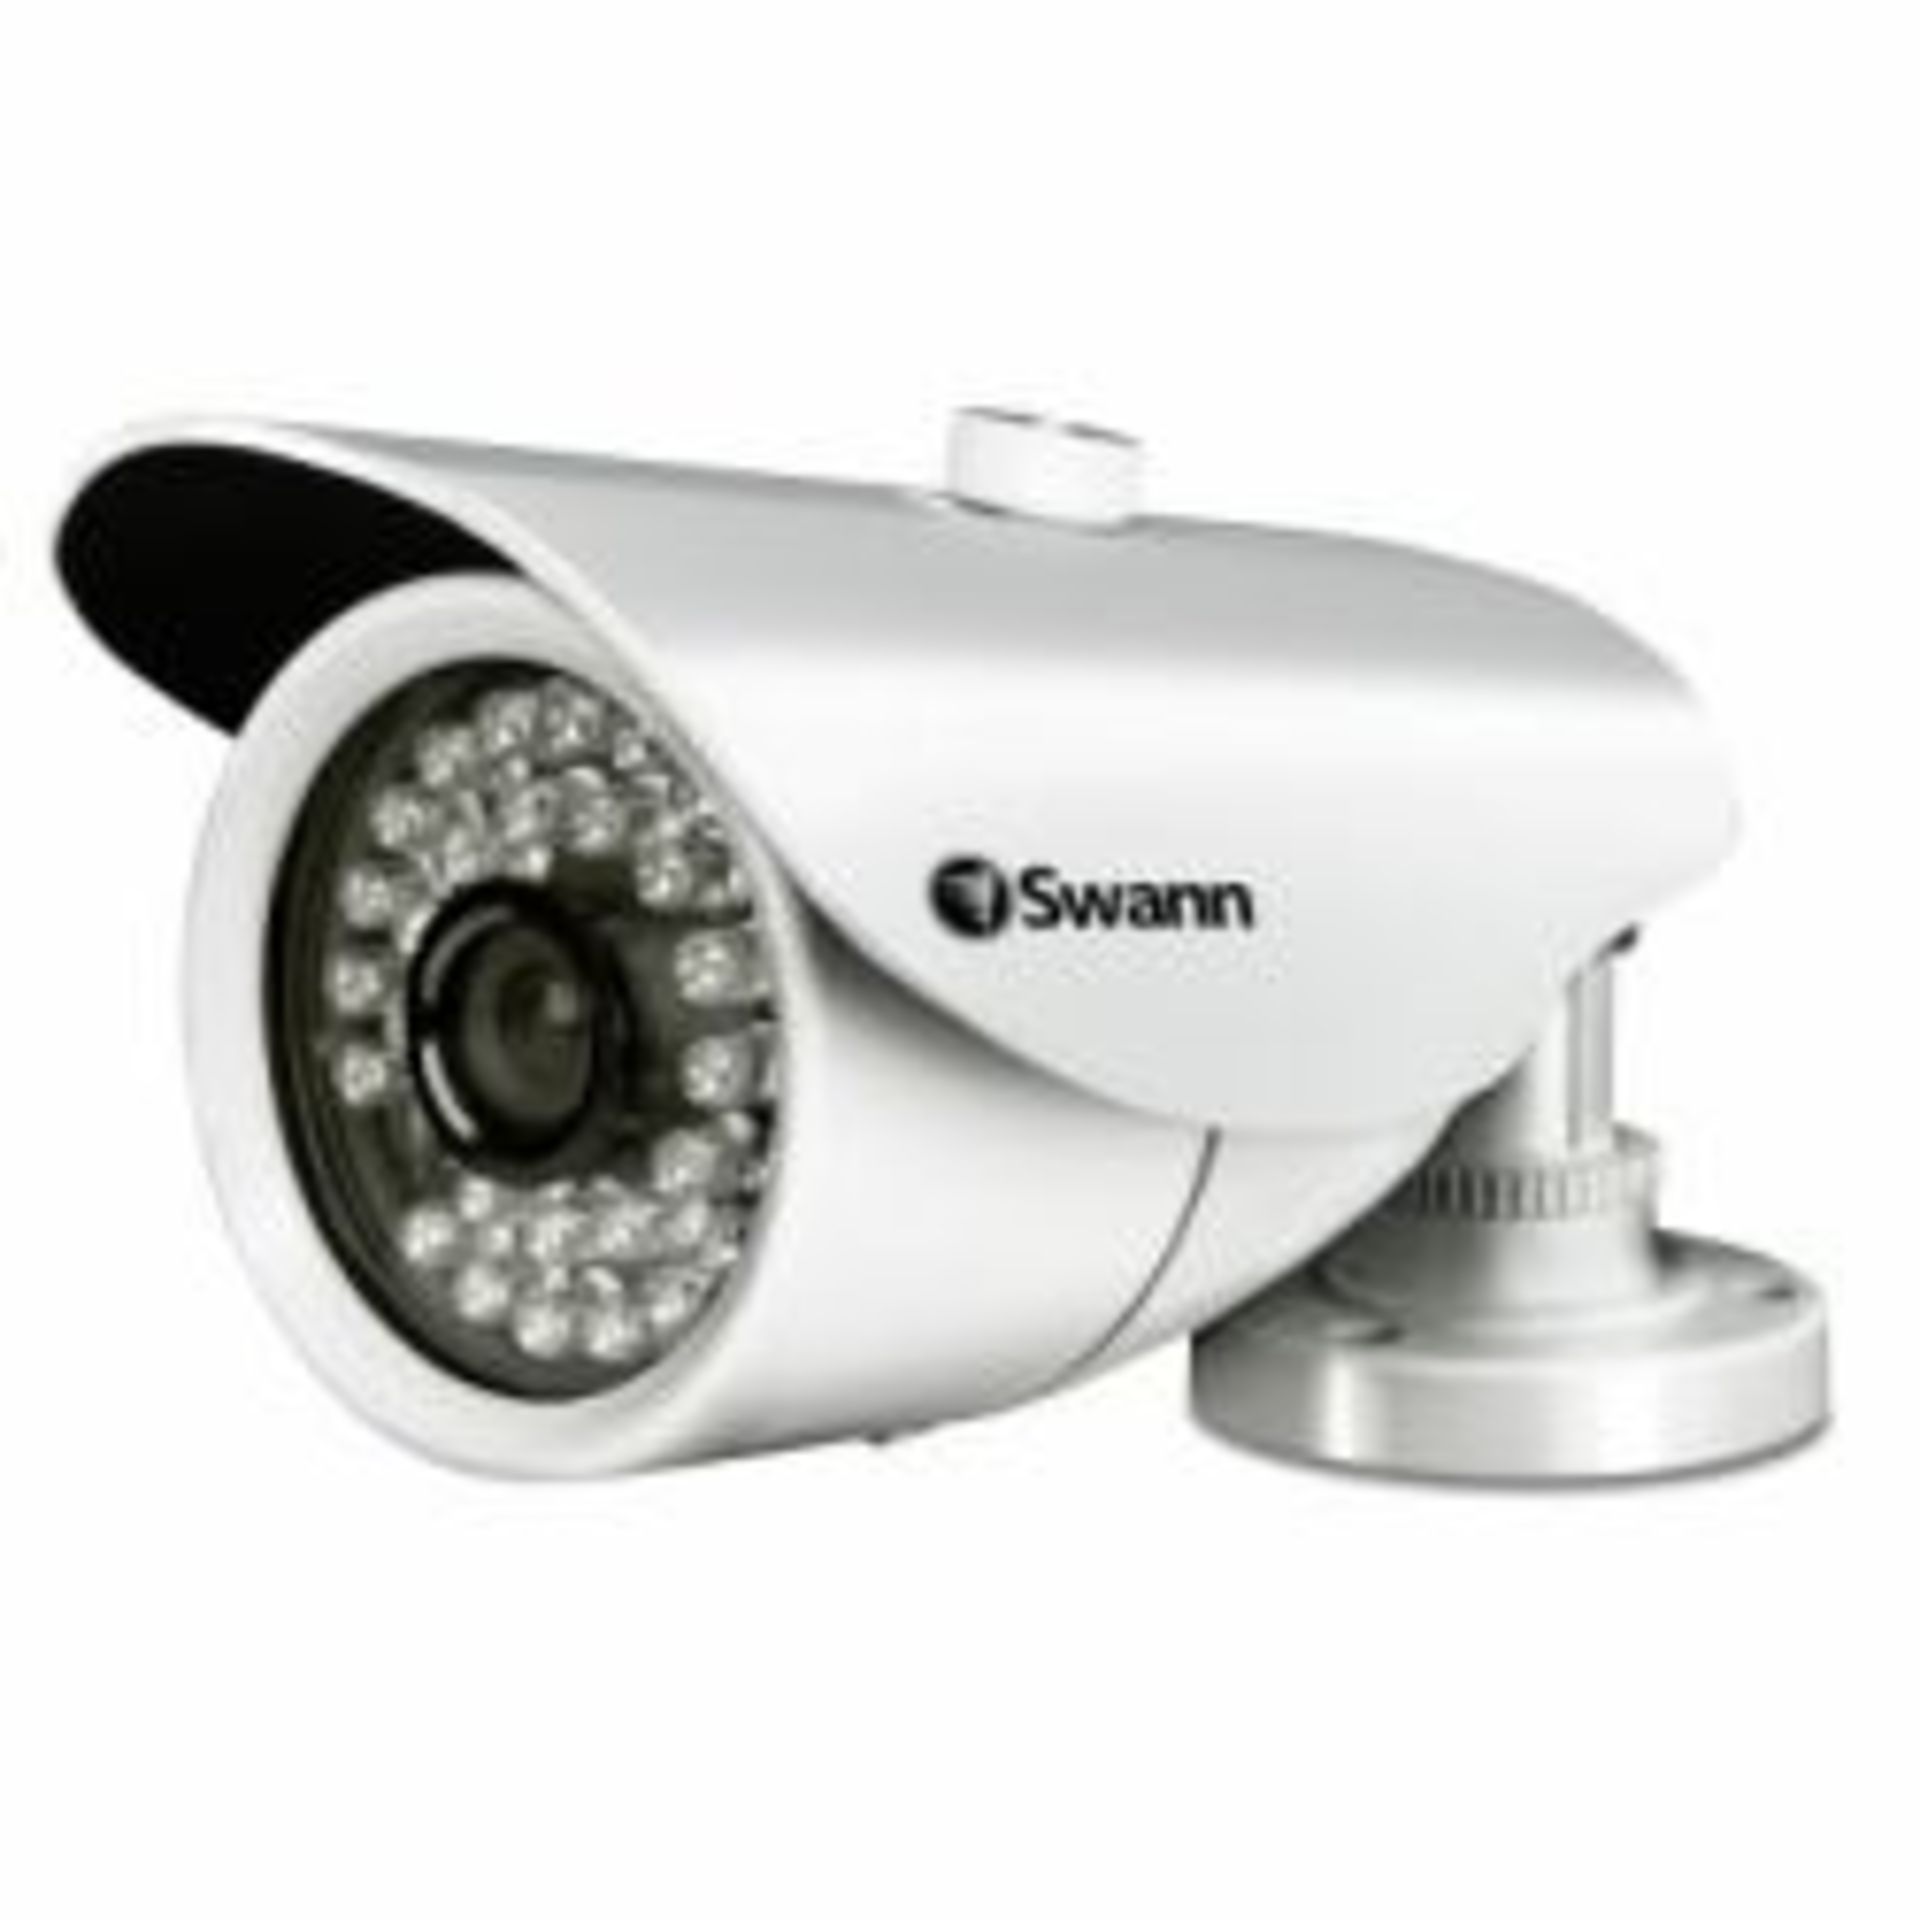 V *TRADE QTY* Brand New Swann PRO-870 Bullet Cam 850 TVL - Powerful Night Vision Up To 35m/114ft X